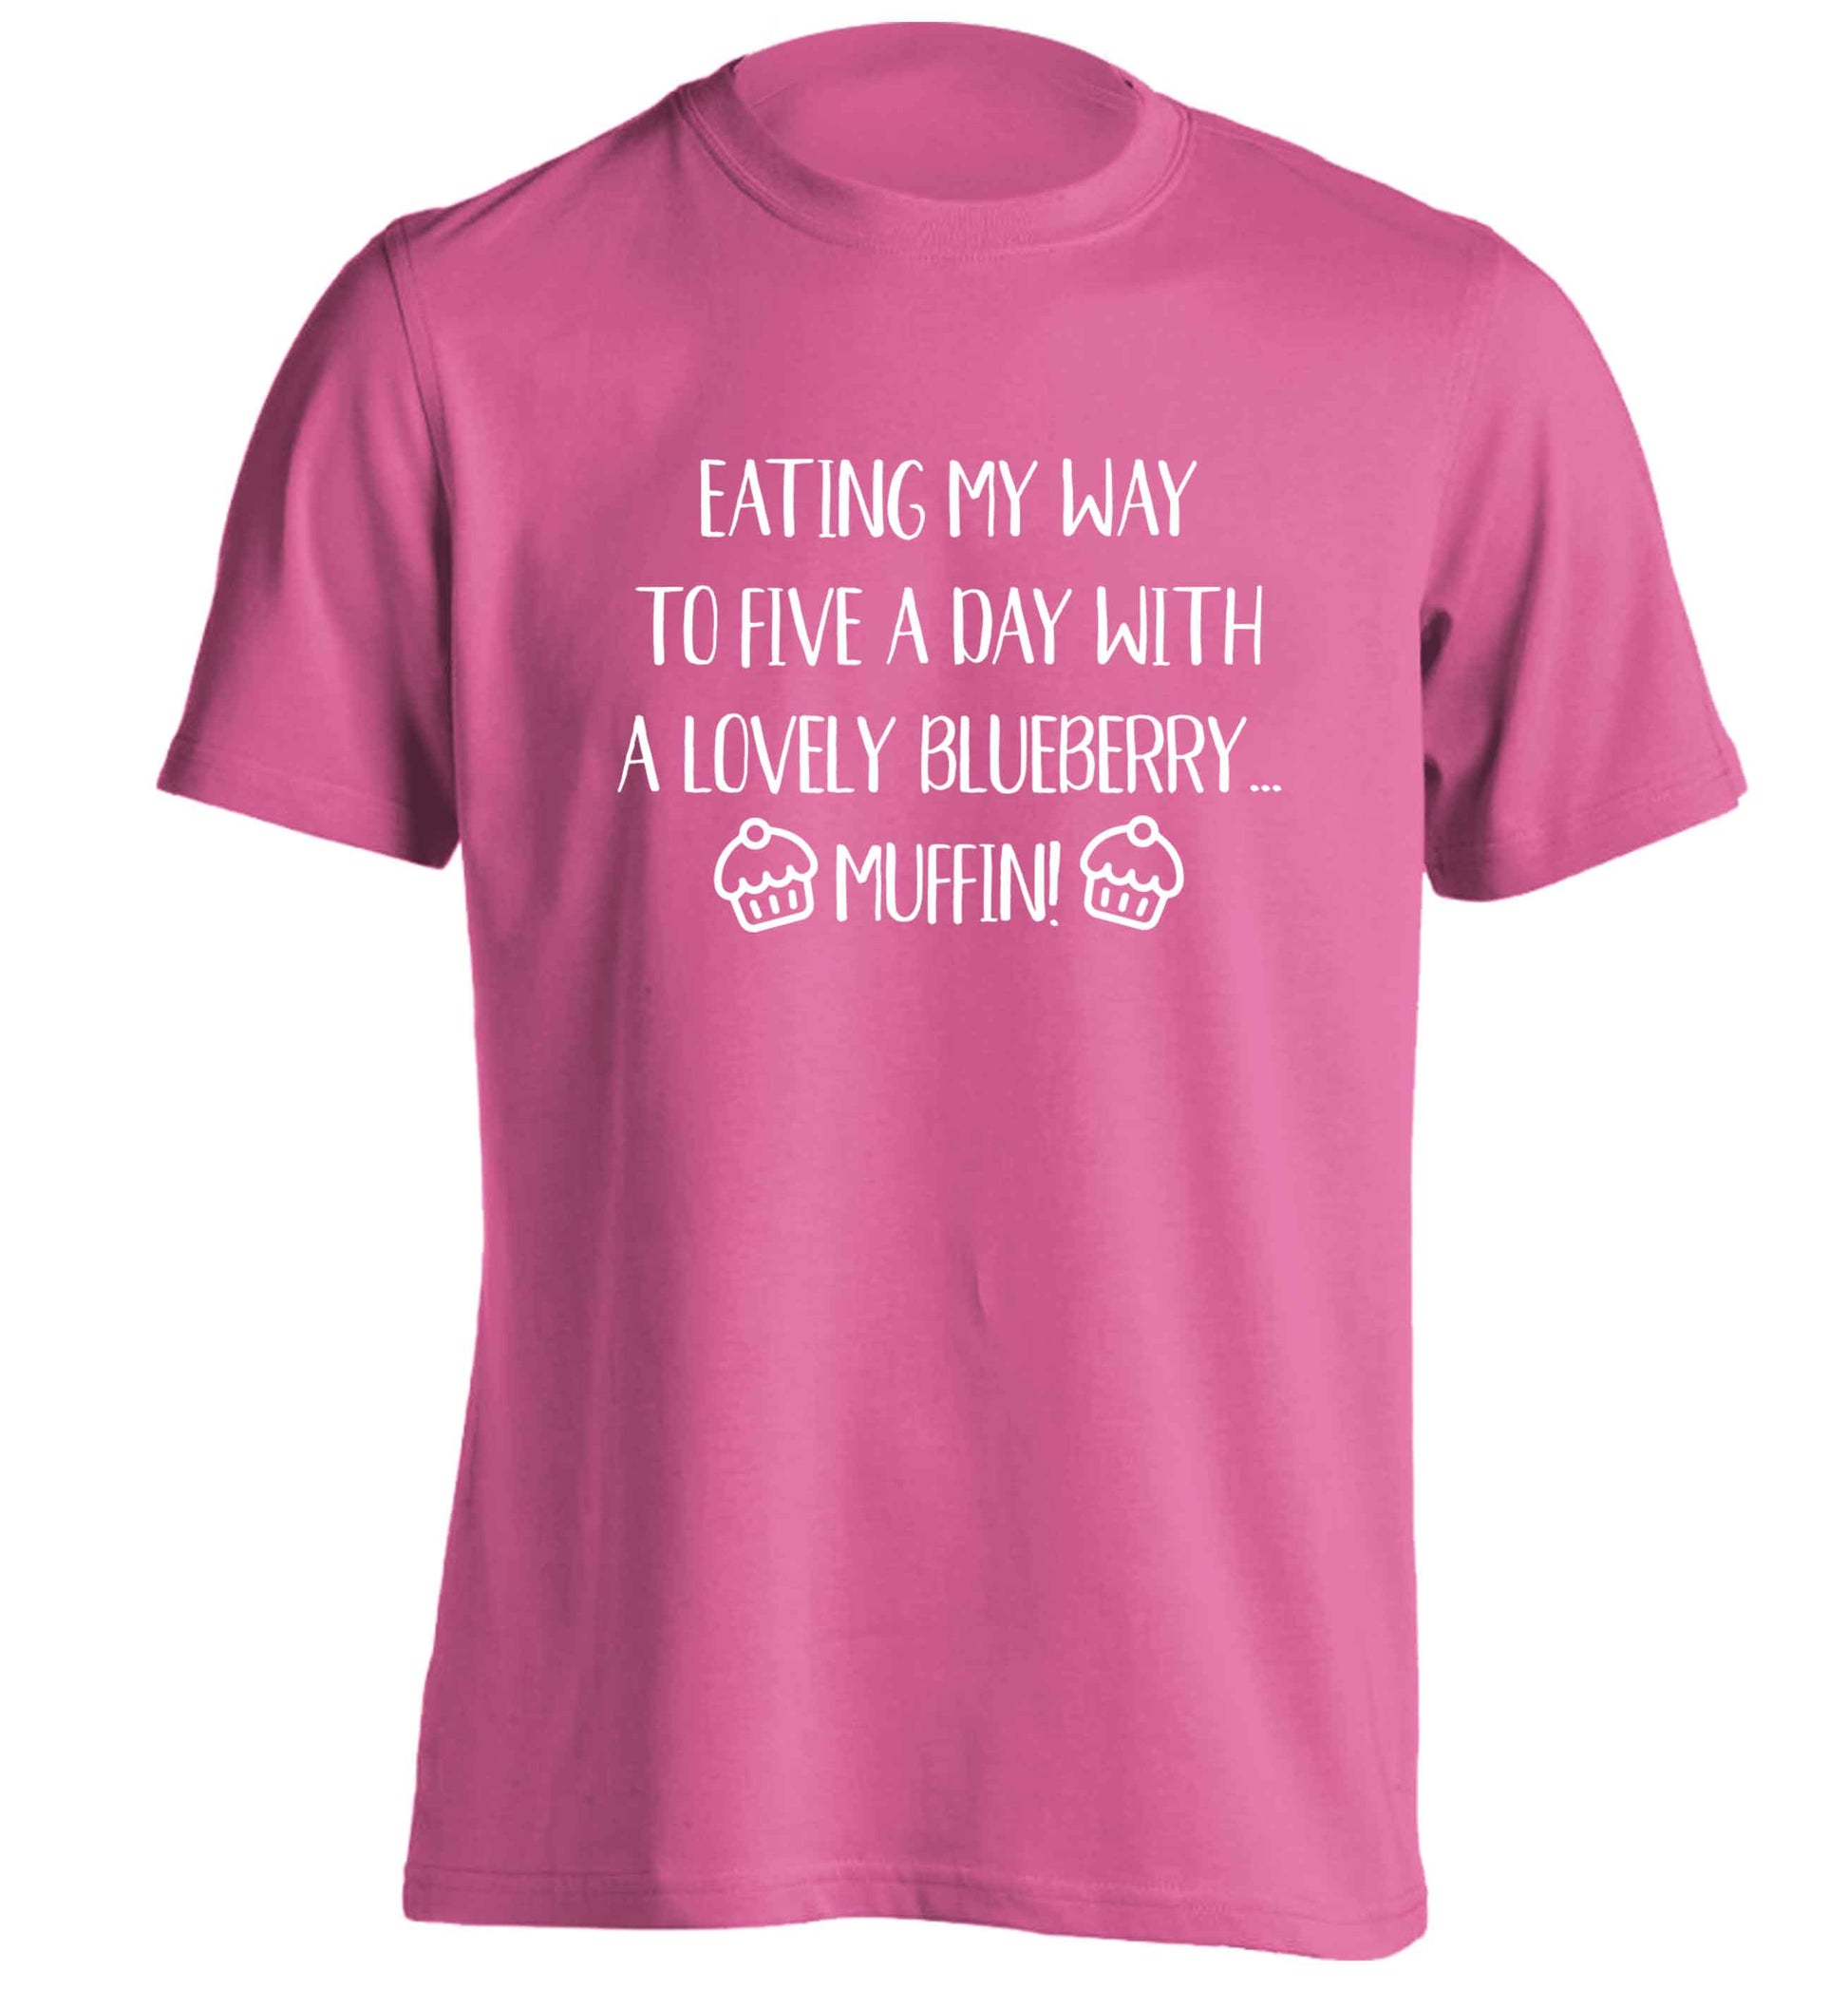 Eating my way to five a day with a lovely blueberry muffin adults unisex pink Tshirt 2XL